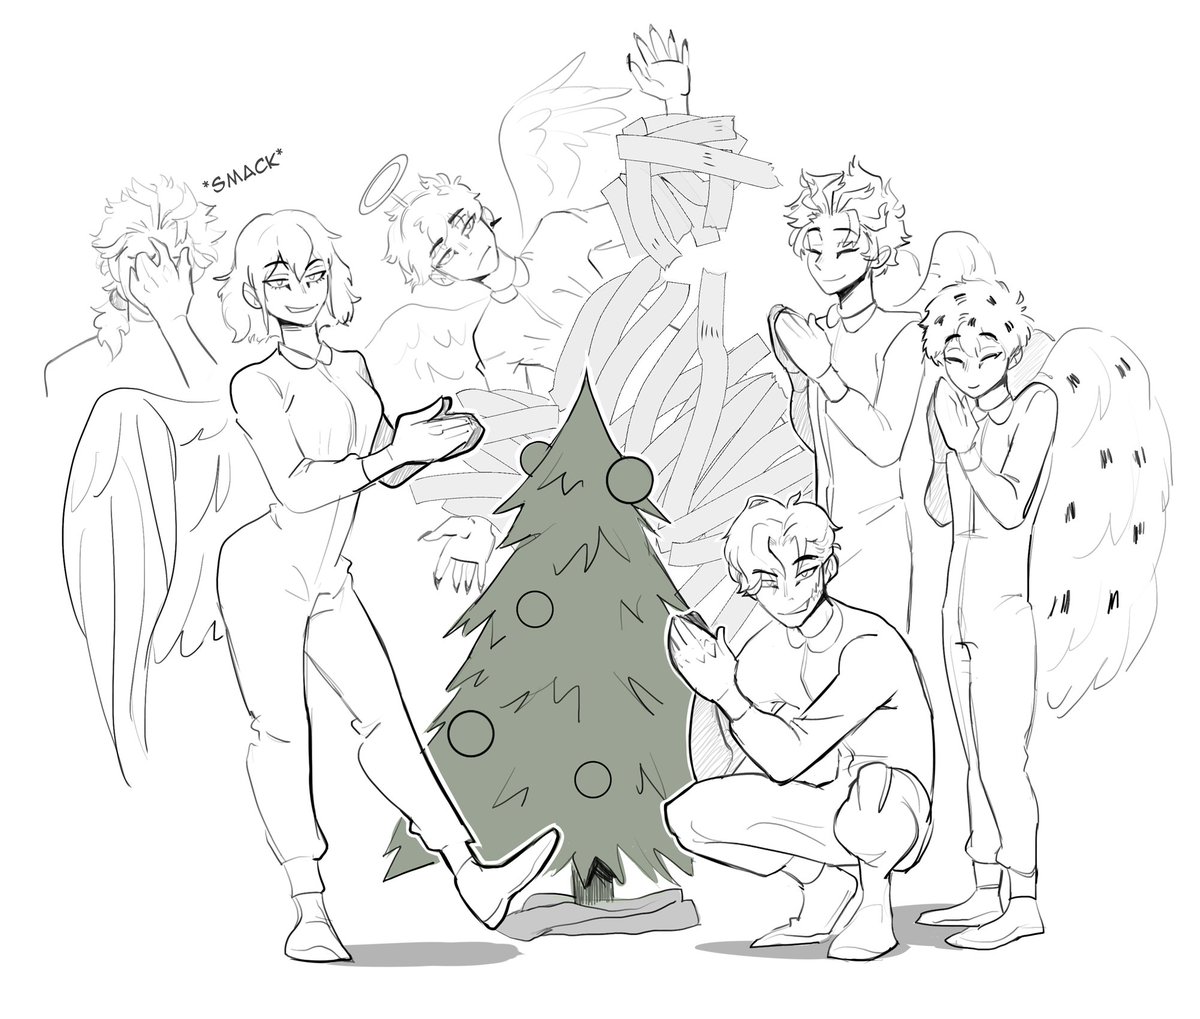 Happy holidays from #Hawks and the #emochickens! #bnha ❄ 